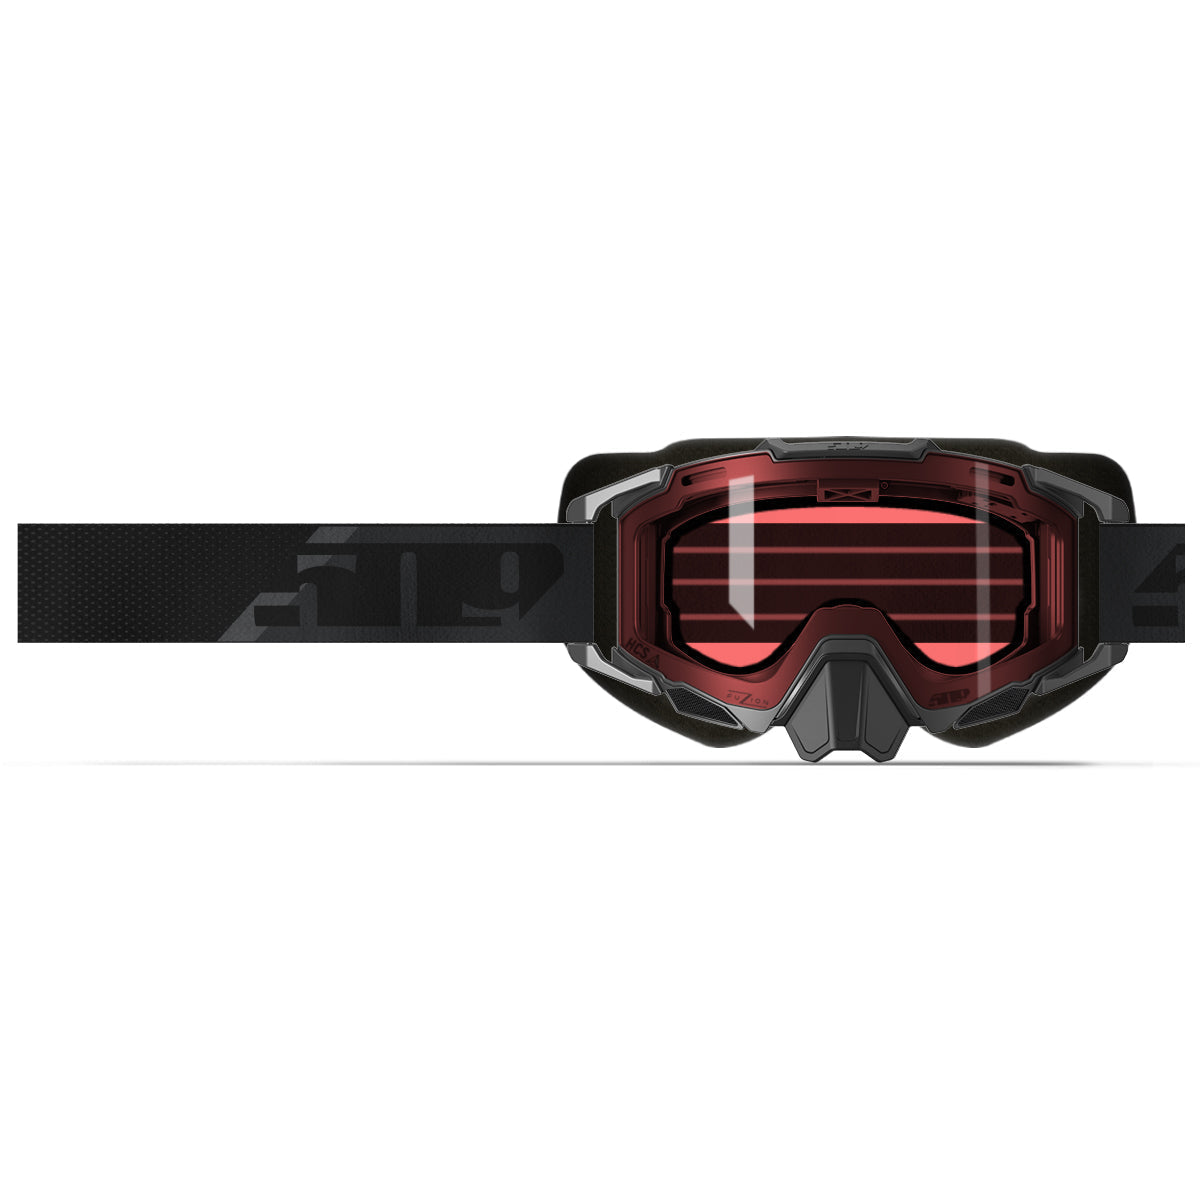 Sinister XL7 Fuzion Flow Goggle